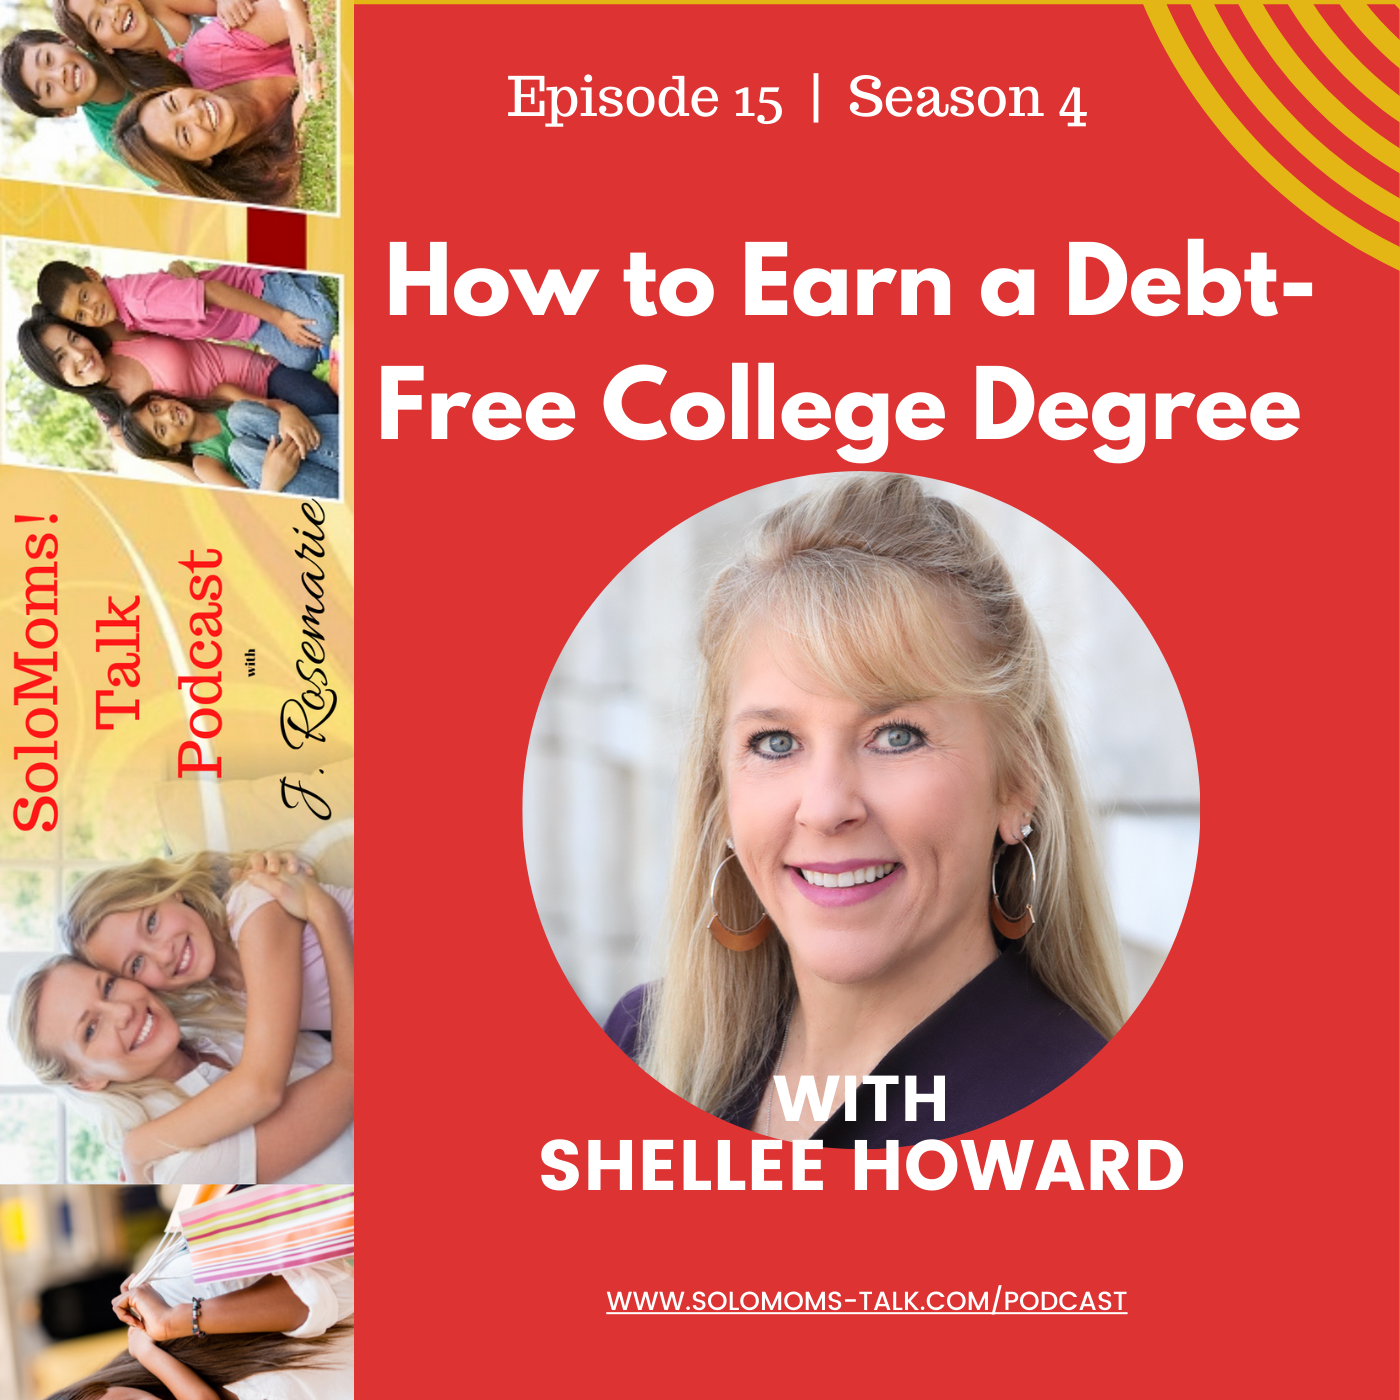 EDUCATION SERIES (Part 3): How to Earn a Debt-Free College Degree w/Shellee Howard